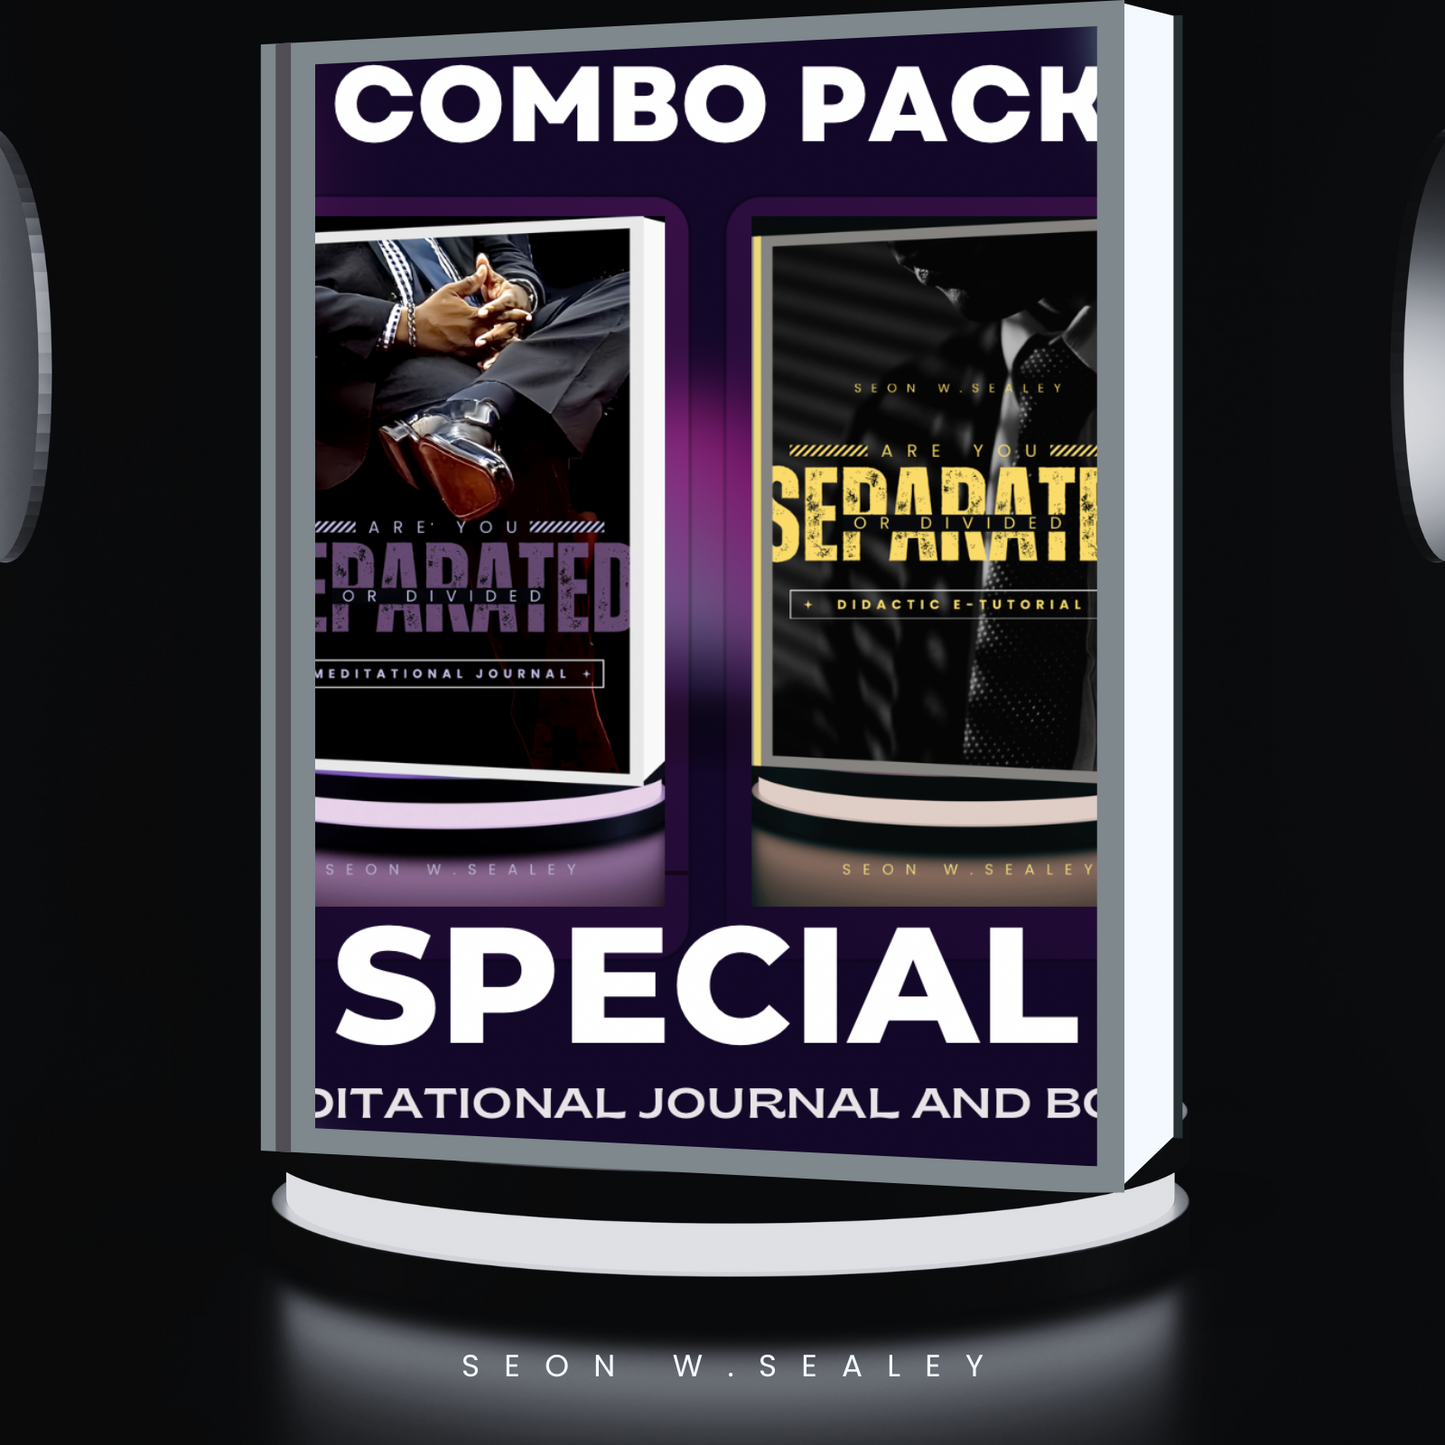 COMBO PACK SPECIAL